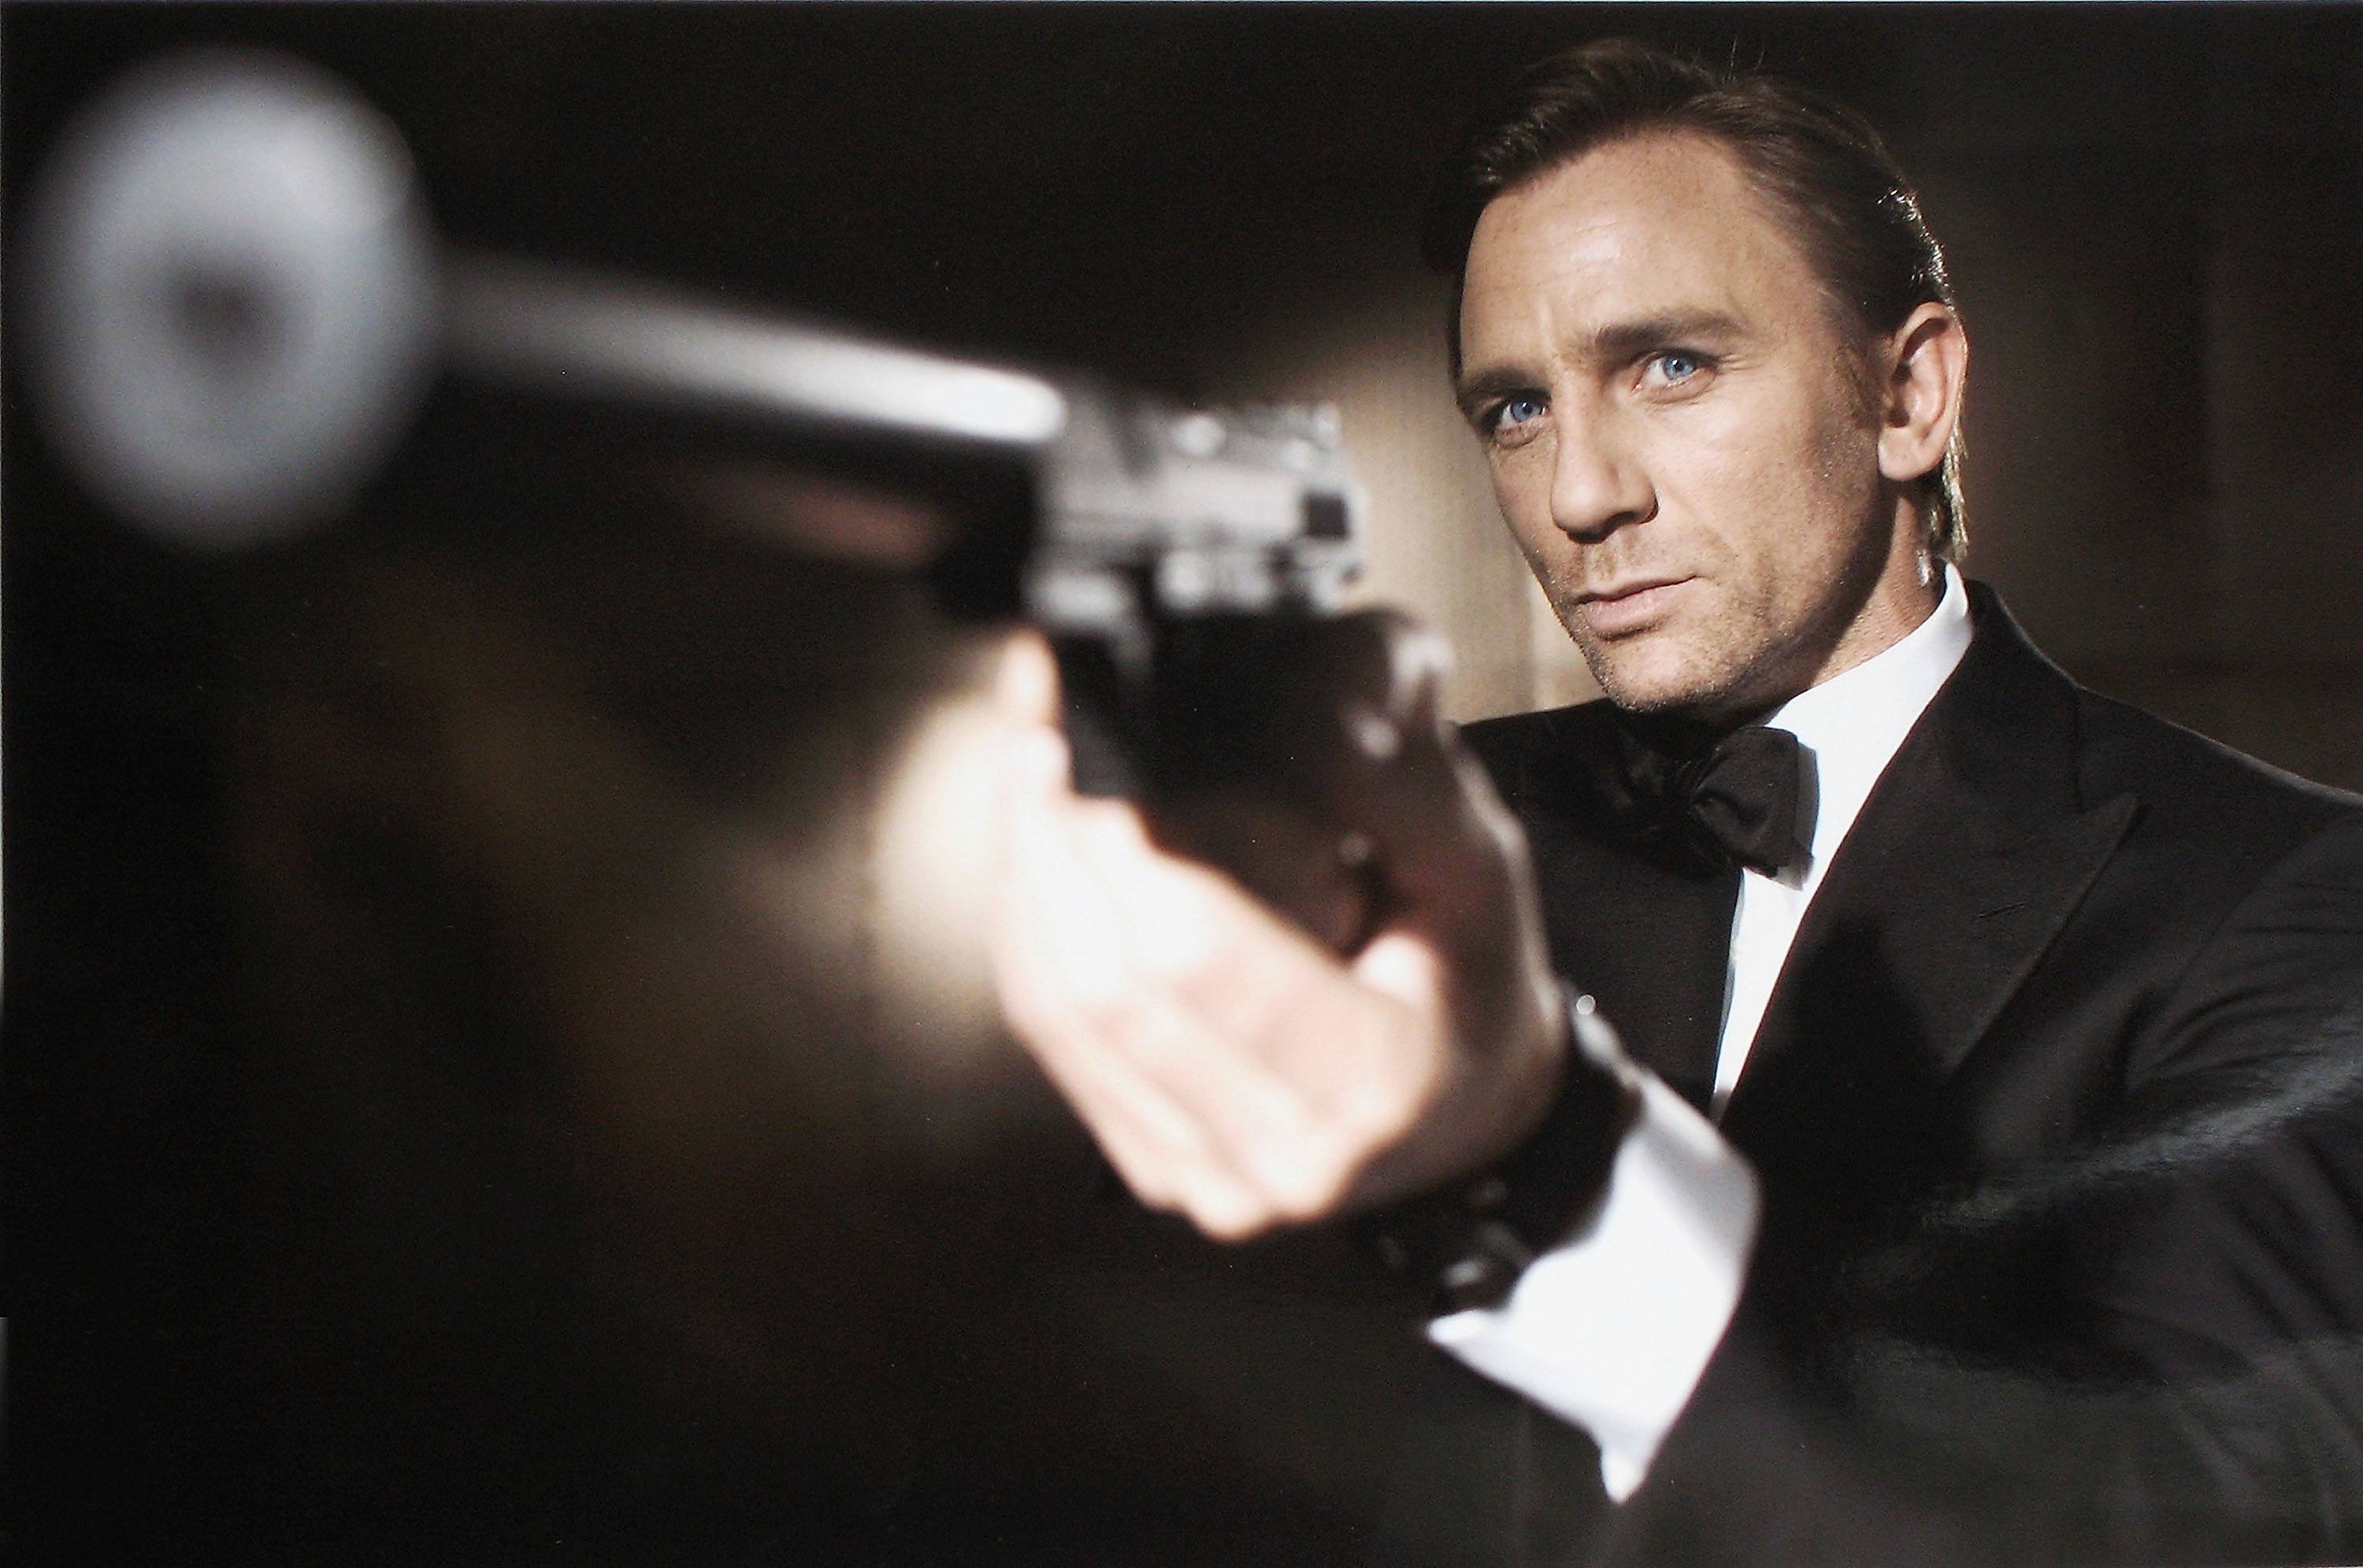 James Bond is Coming to Amazon Prime Video This Month